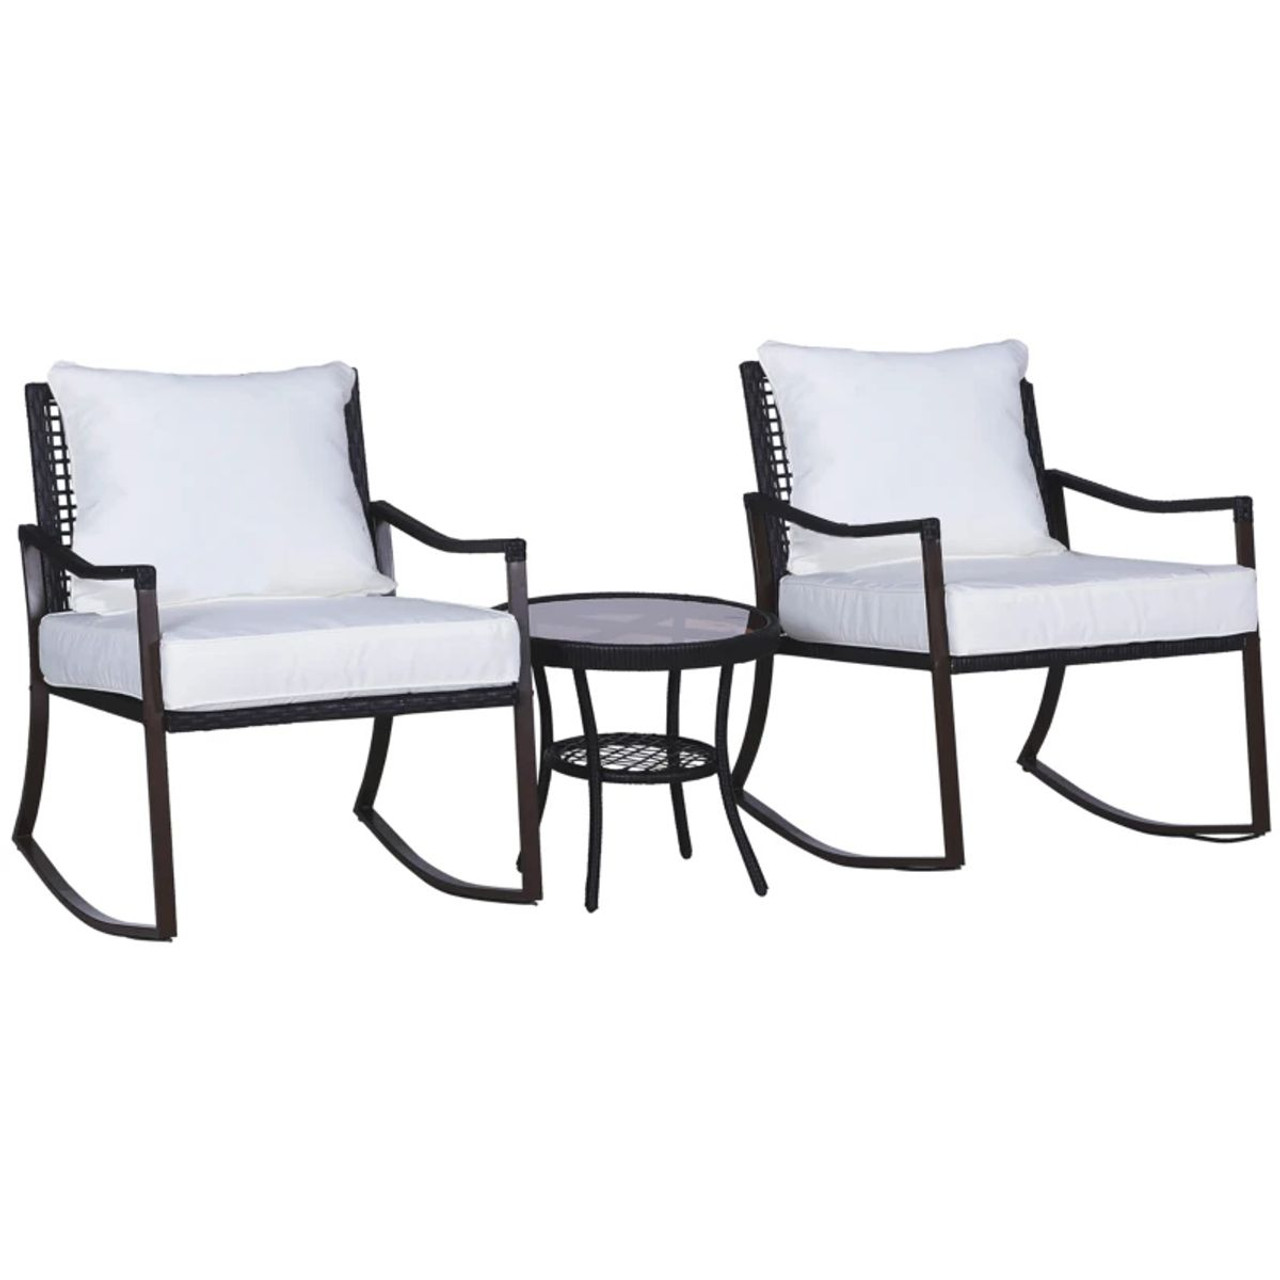 Outsunny® 3-Piece Patio Rocking Chair Set product image